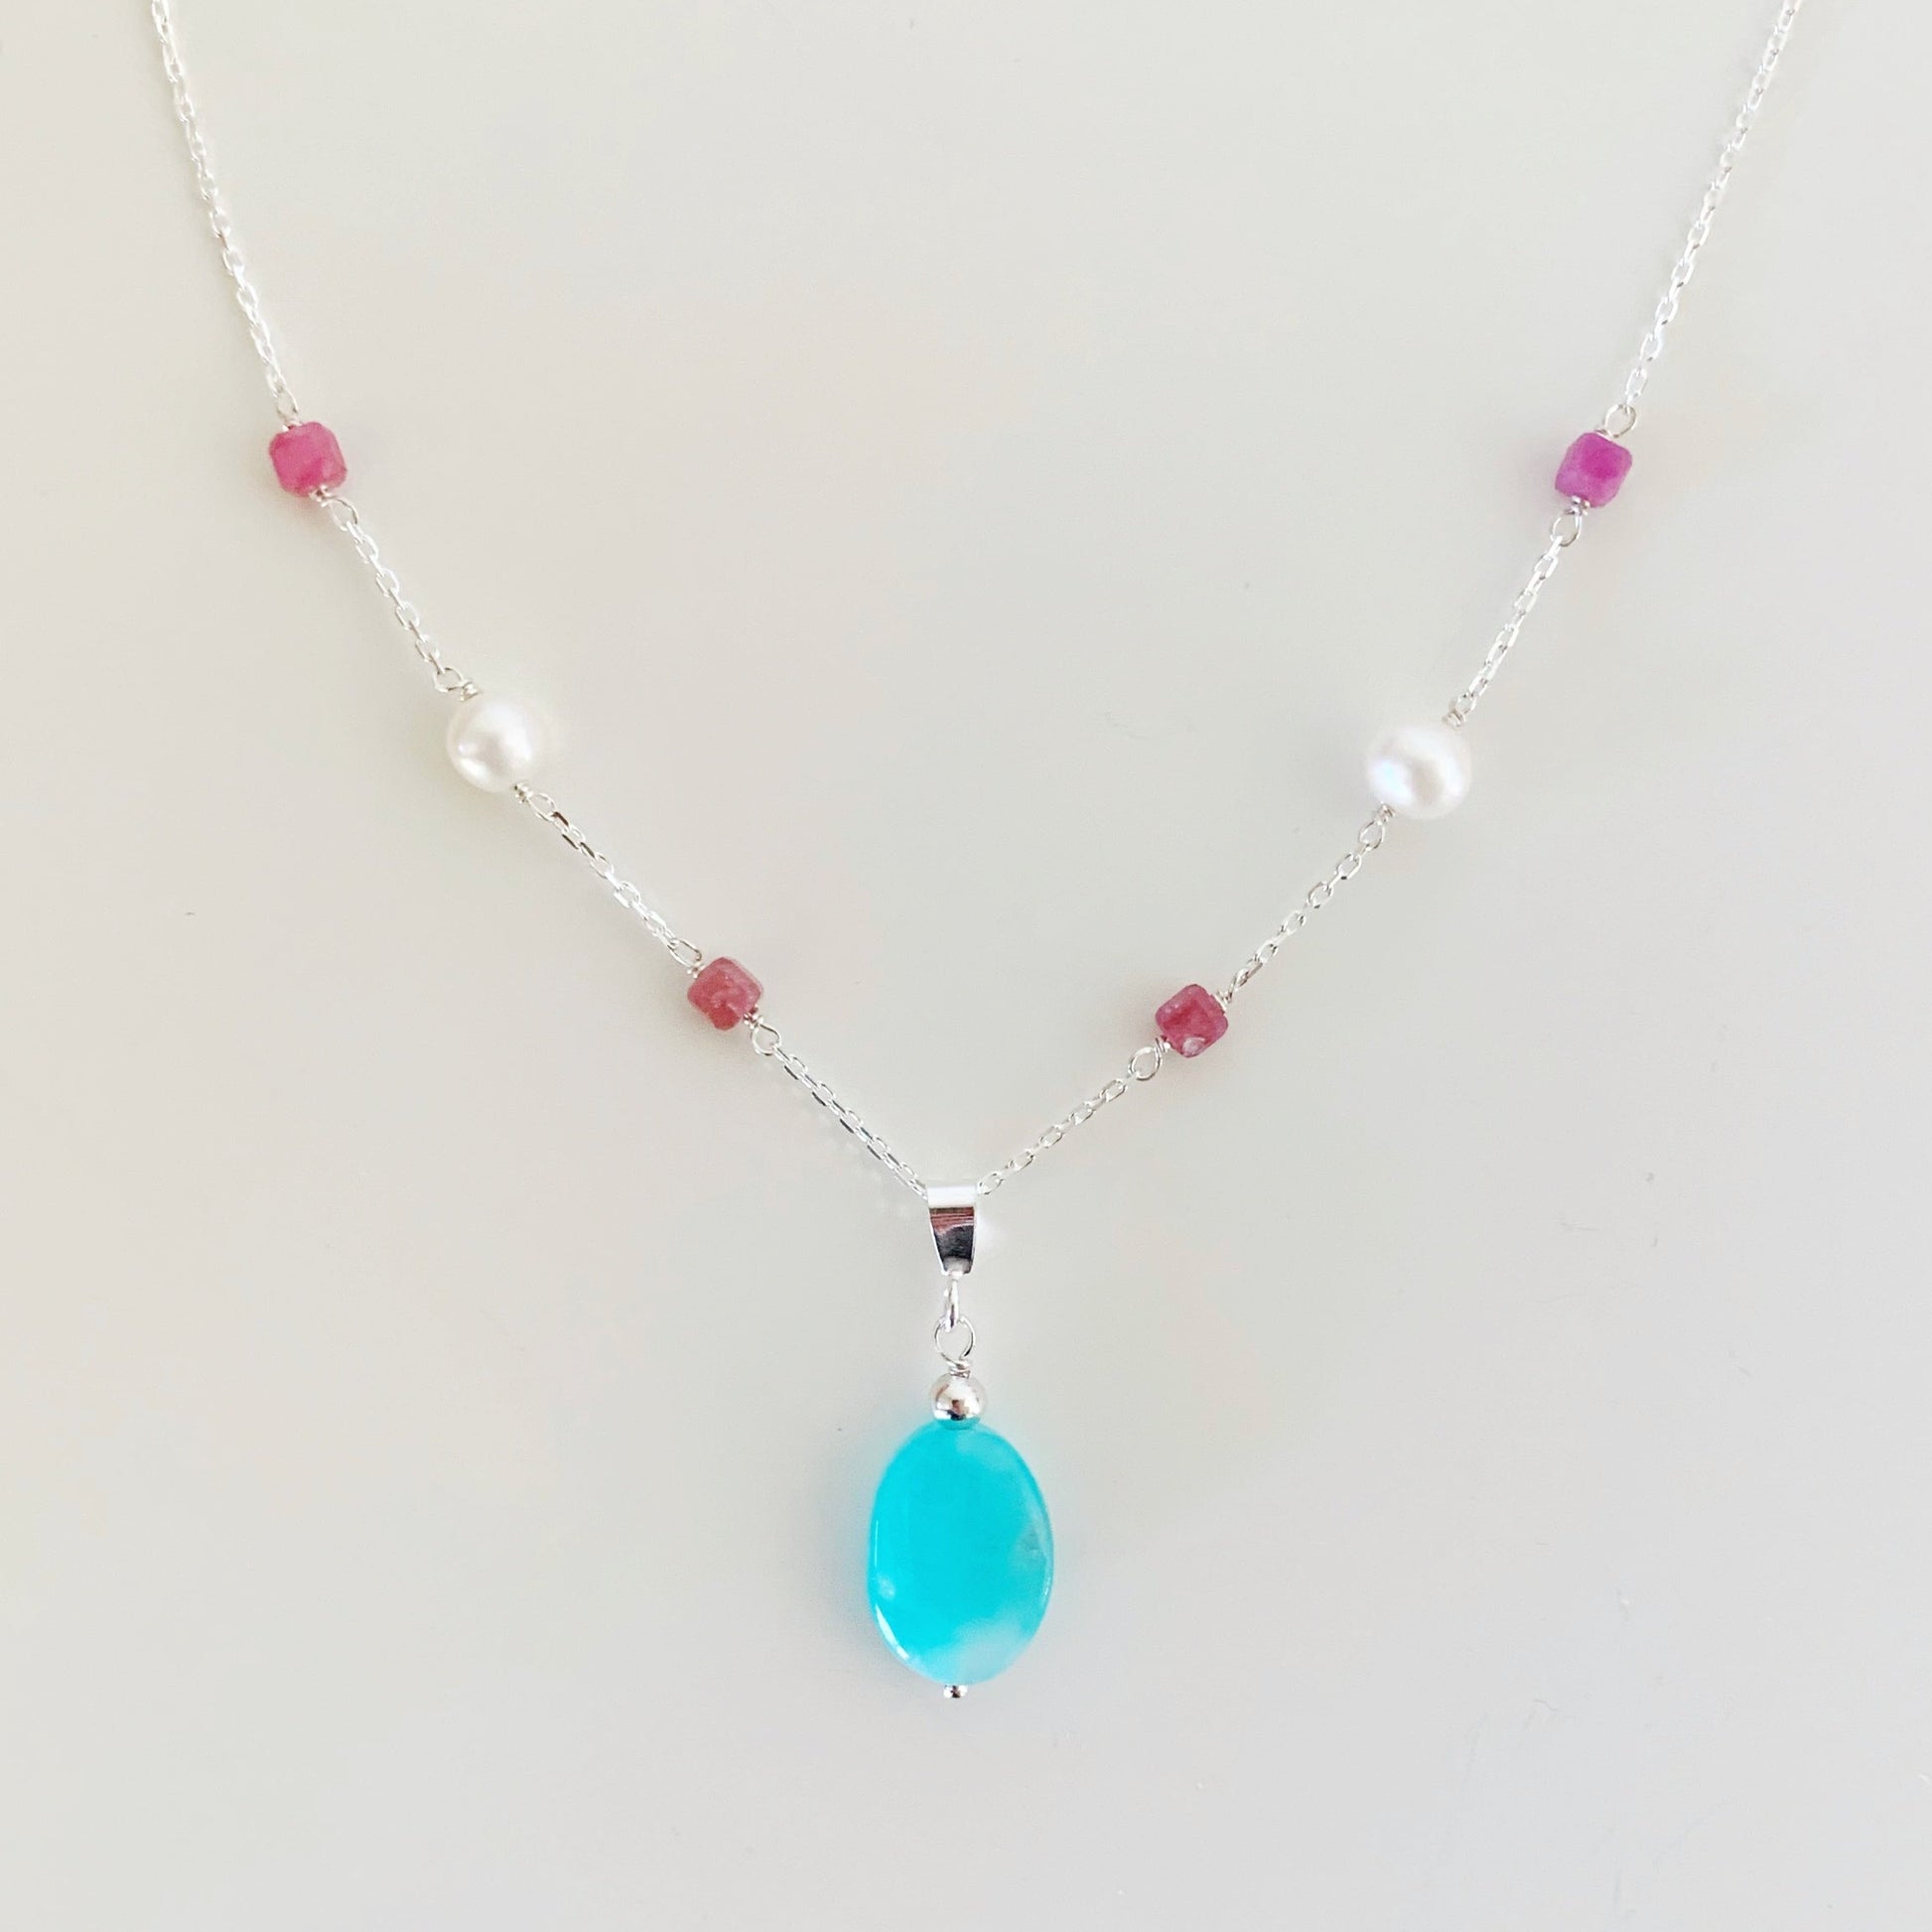 the harwich port necklace by mermaids and madeleines is a pendant style necklace with bright amazonite suspended from sterling silver chain with pink tourmaline and freshwater pearls. this necklace is viewed closer up and is photographed on a white surface